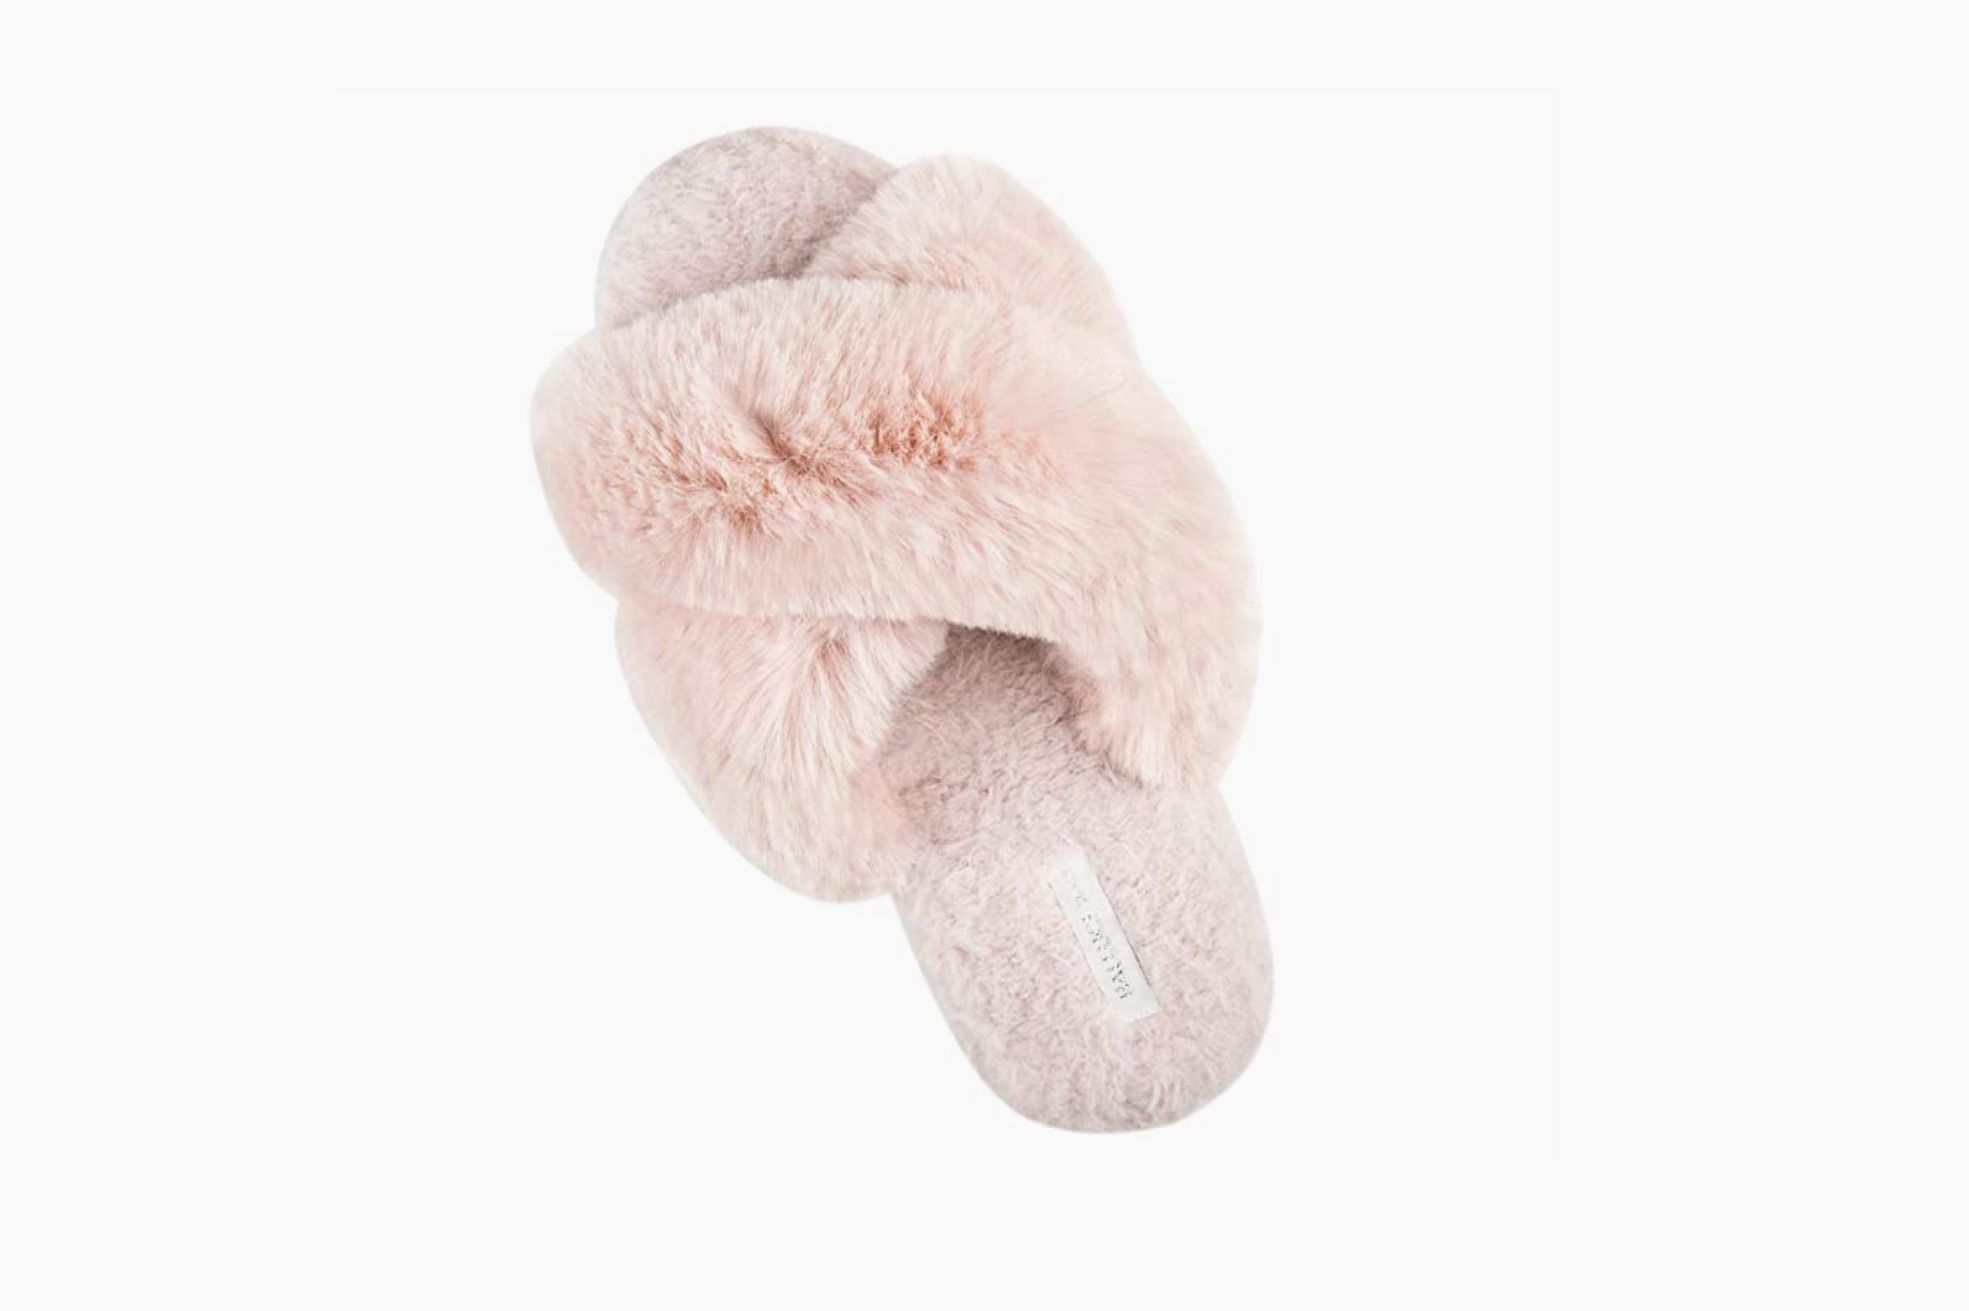 22  Fuzzy slippers, Slippers, Pink slippers